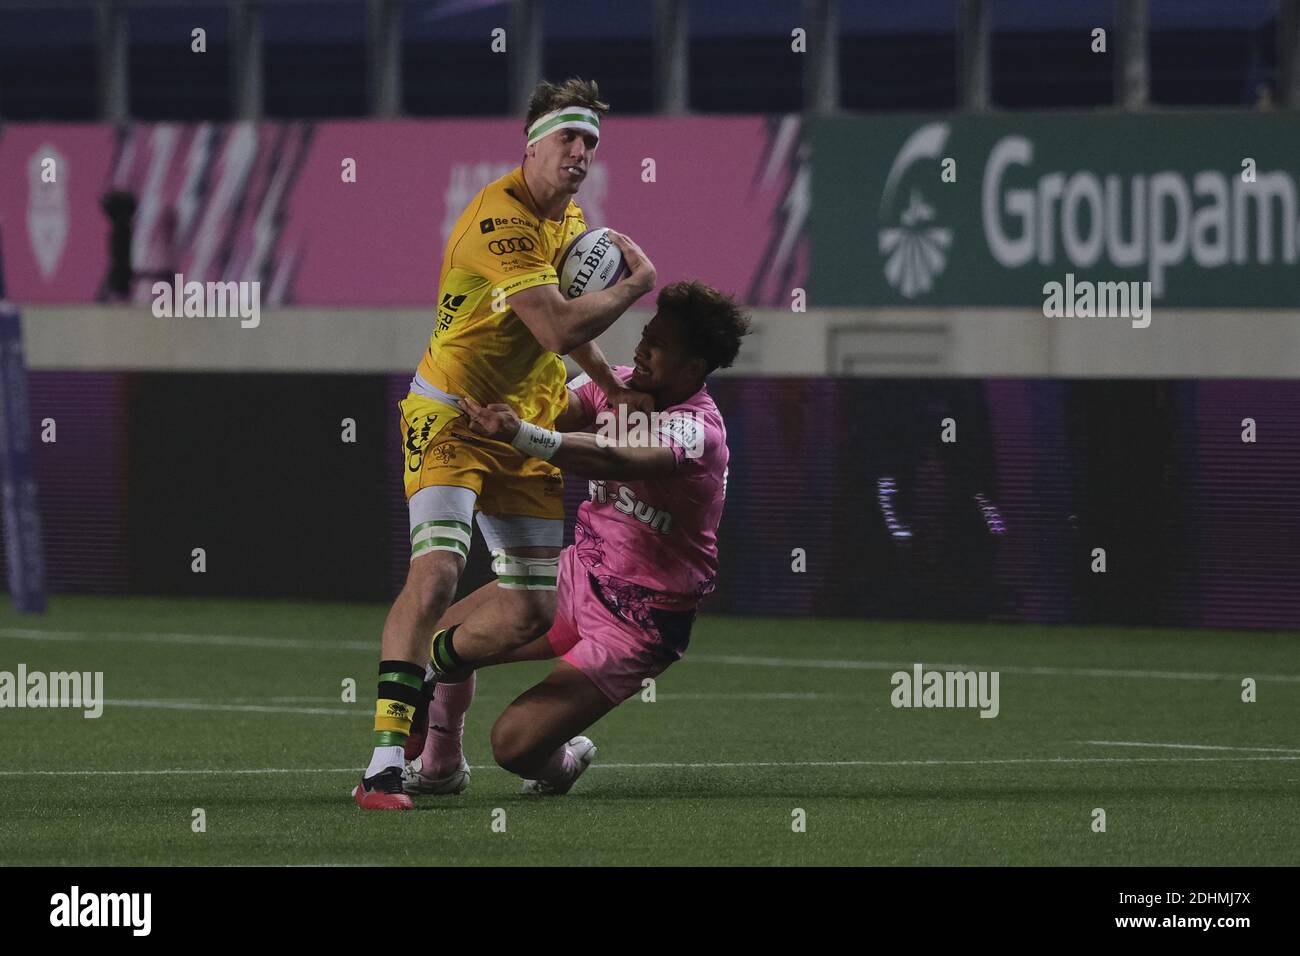 Paris, France. 11th Dec, 2020. Trevise Lock FEDERICO RUZZA in action during the Europpean Challenge Rugby Cup Day one between Stade Francais and Benetton Rugby Trevise at Jean Bouin Stadium in Paris - France.Trevise won 44-20 Credit: Pierre Stevenin/ZUMA Wire/Alamy Live News Stock Photo